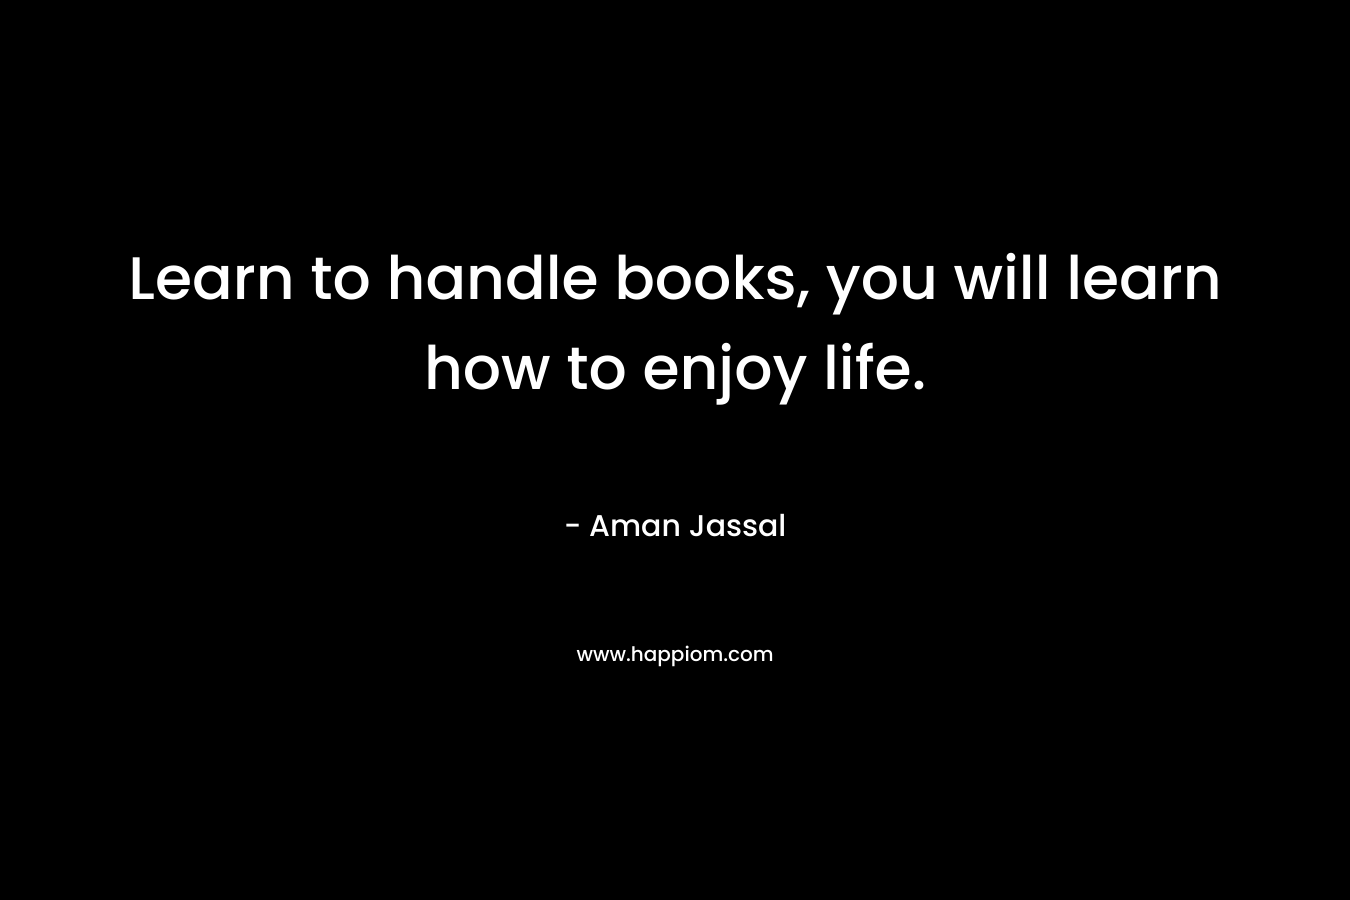 Learn to handle books, you will learn how to enjoy life.